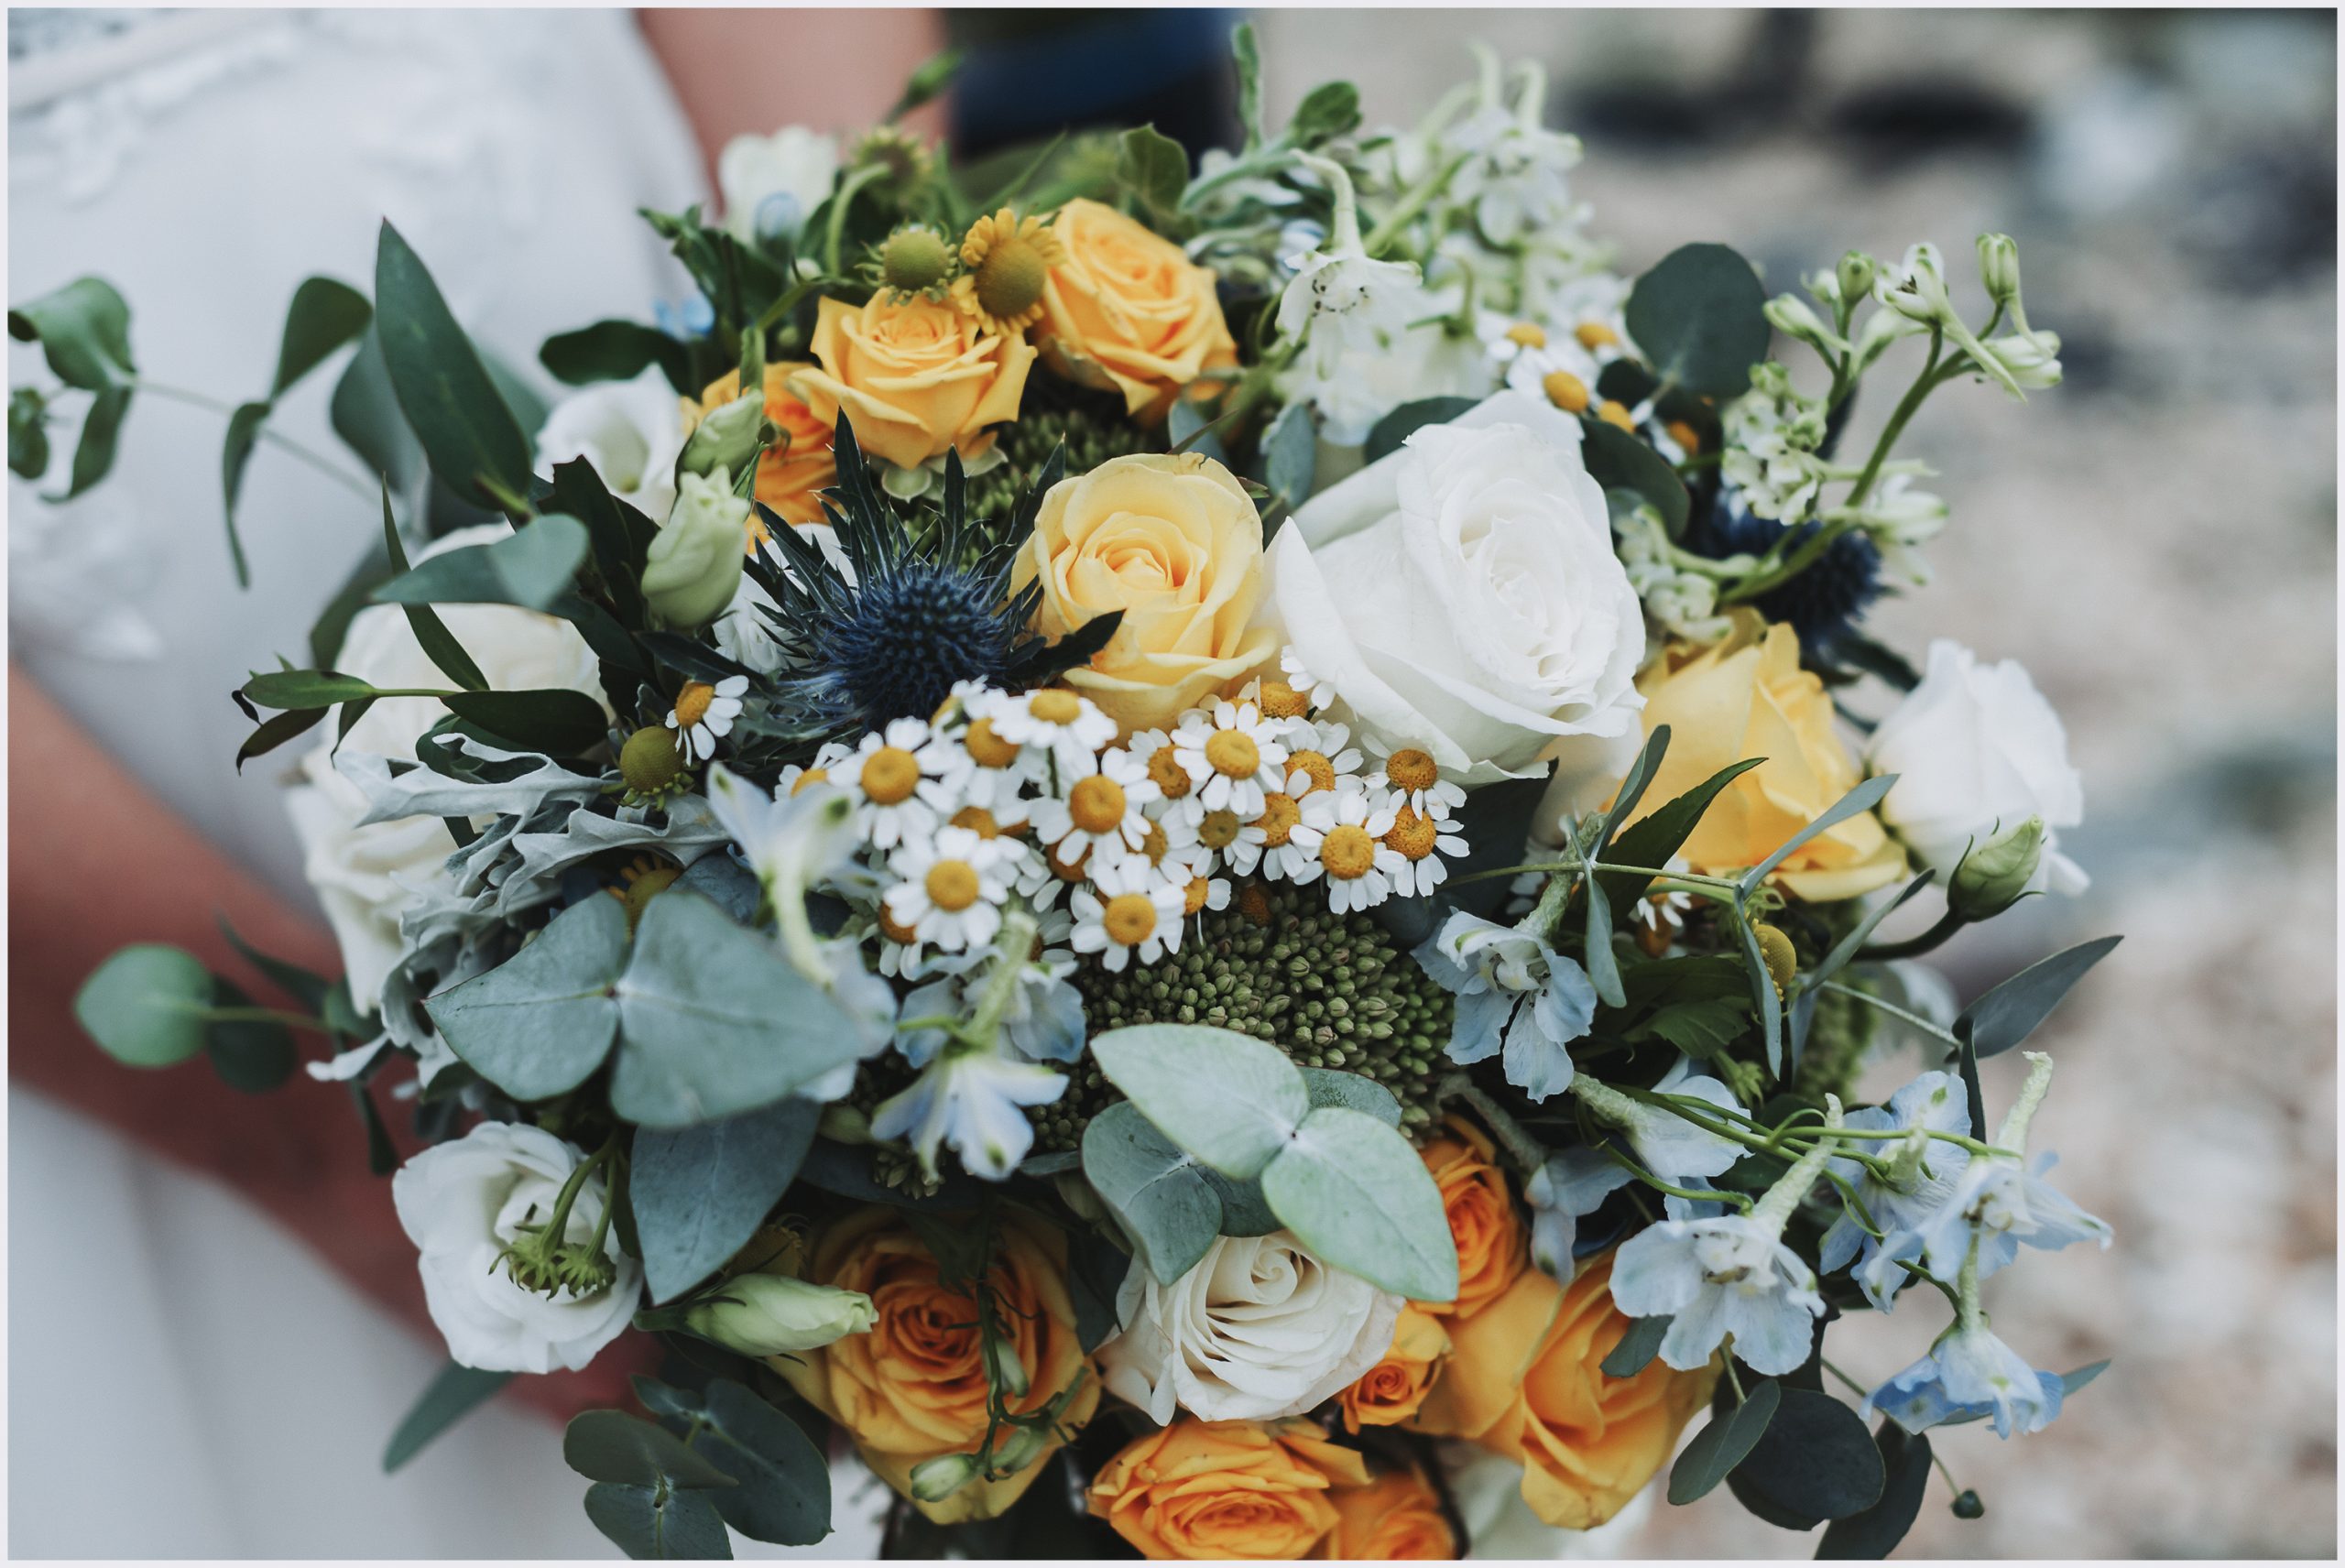 Elegant bridal bouquet made up of white and yellow roses, daisies and thistles.  Image captured by Helena Jayne Photography a north Wales based wedding photographer